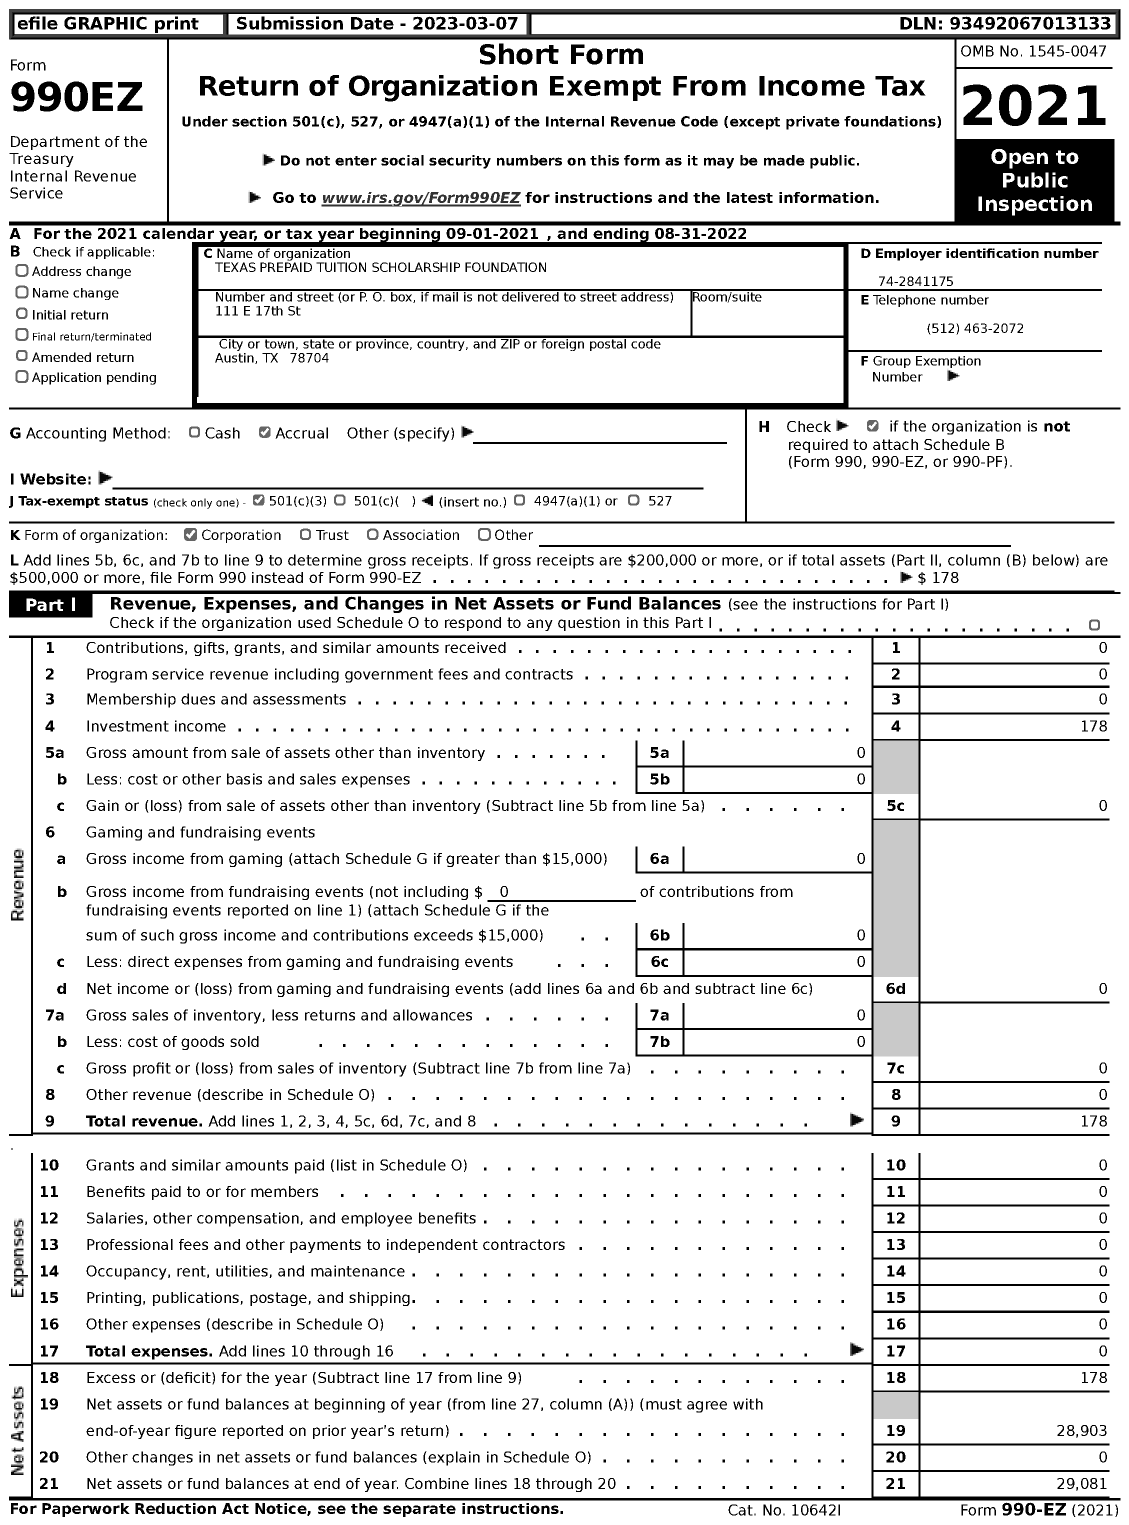 Image of first page of 2021 Form 990EZ for Texas Prepaid Tuition Scholarship Foundation